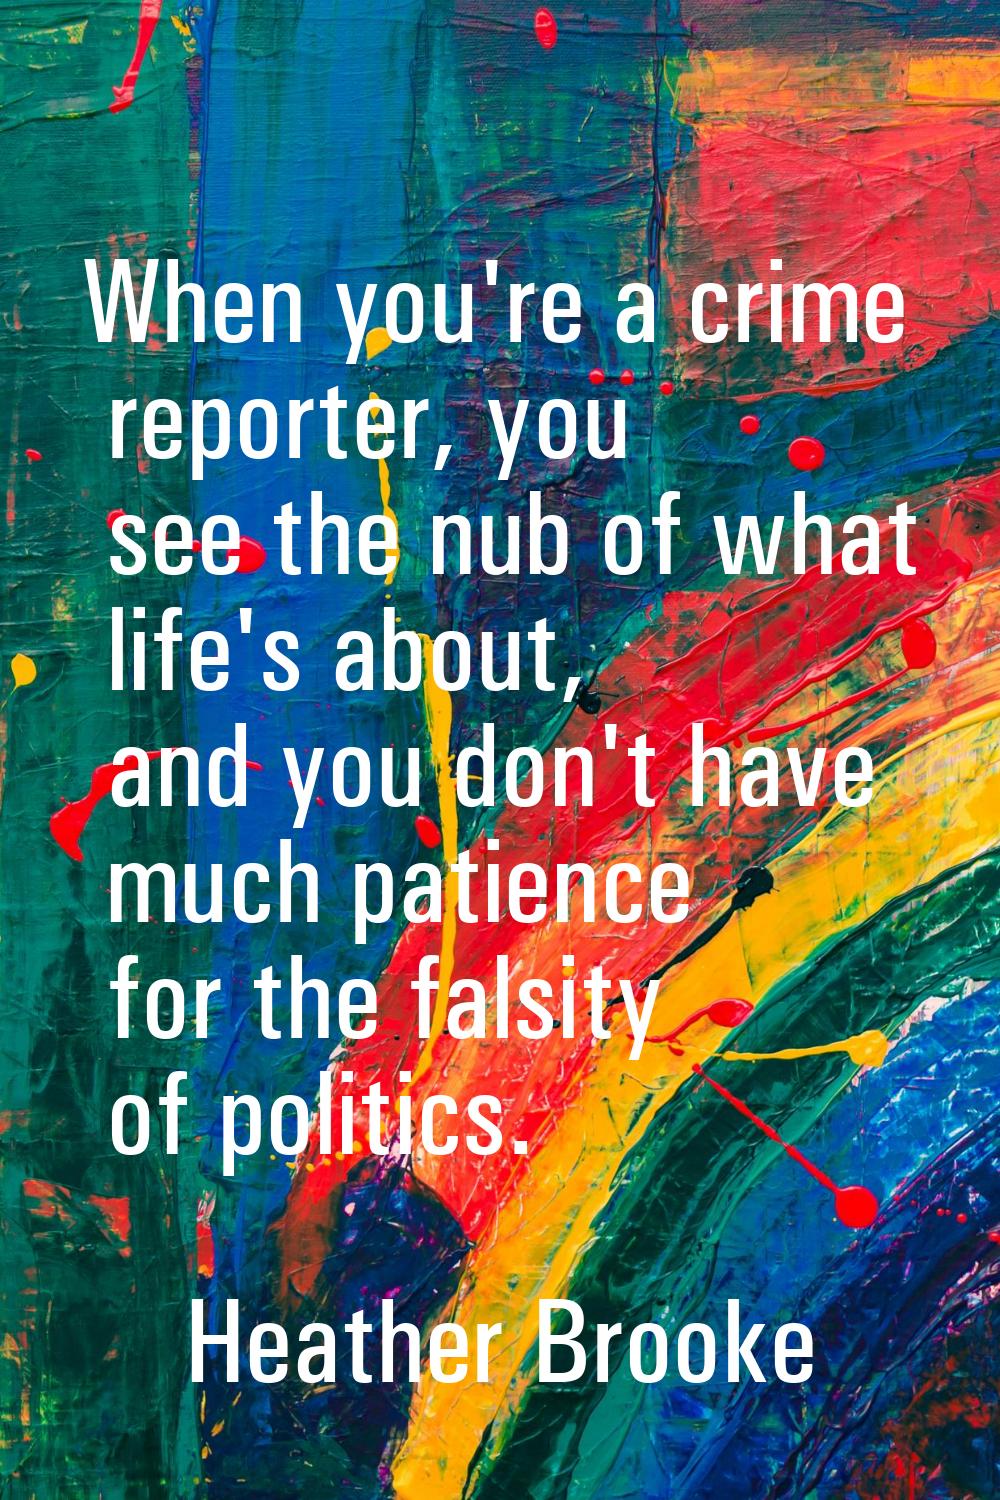 When you're a crime reporter, you see the nub of what life's about, and you don't have much patienc